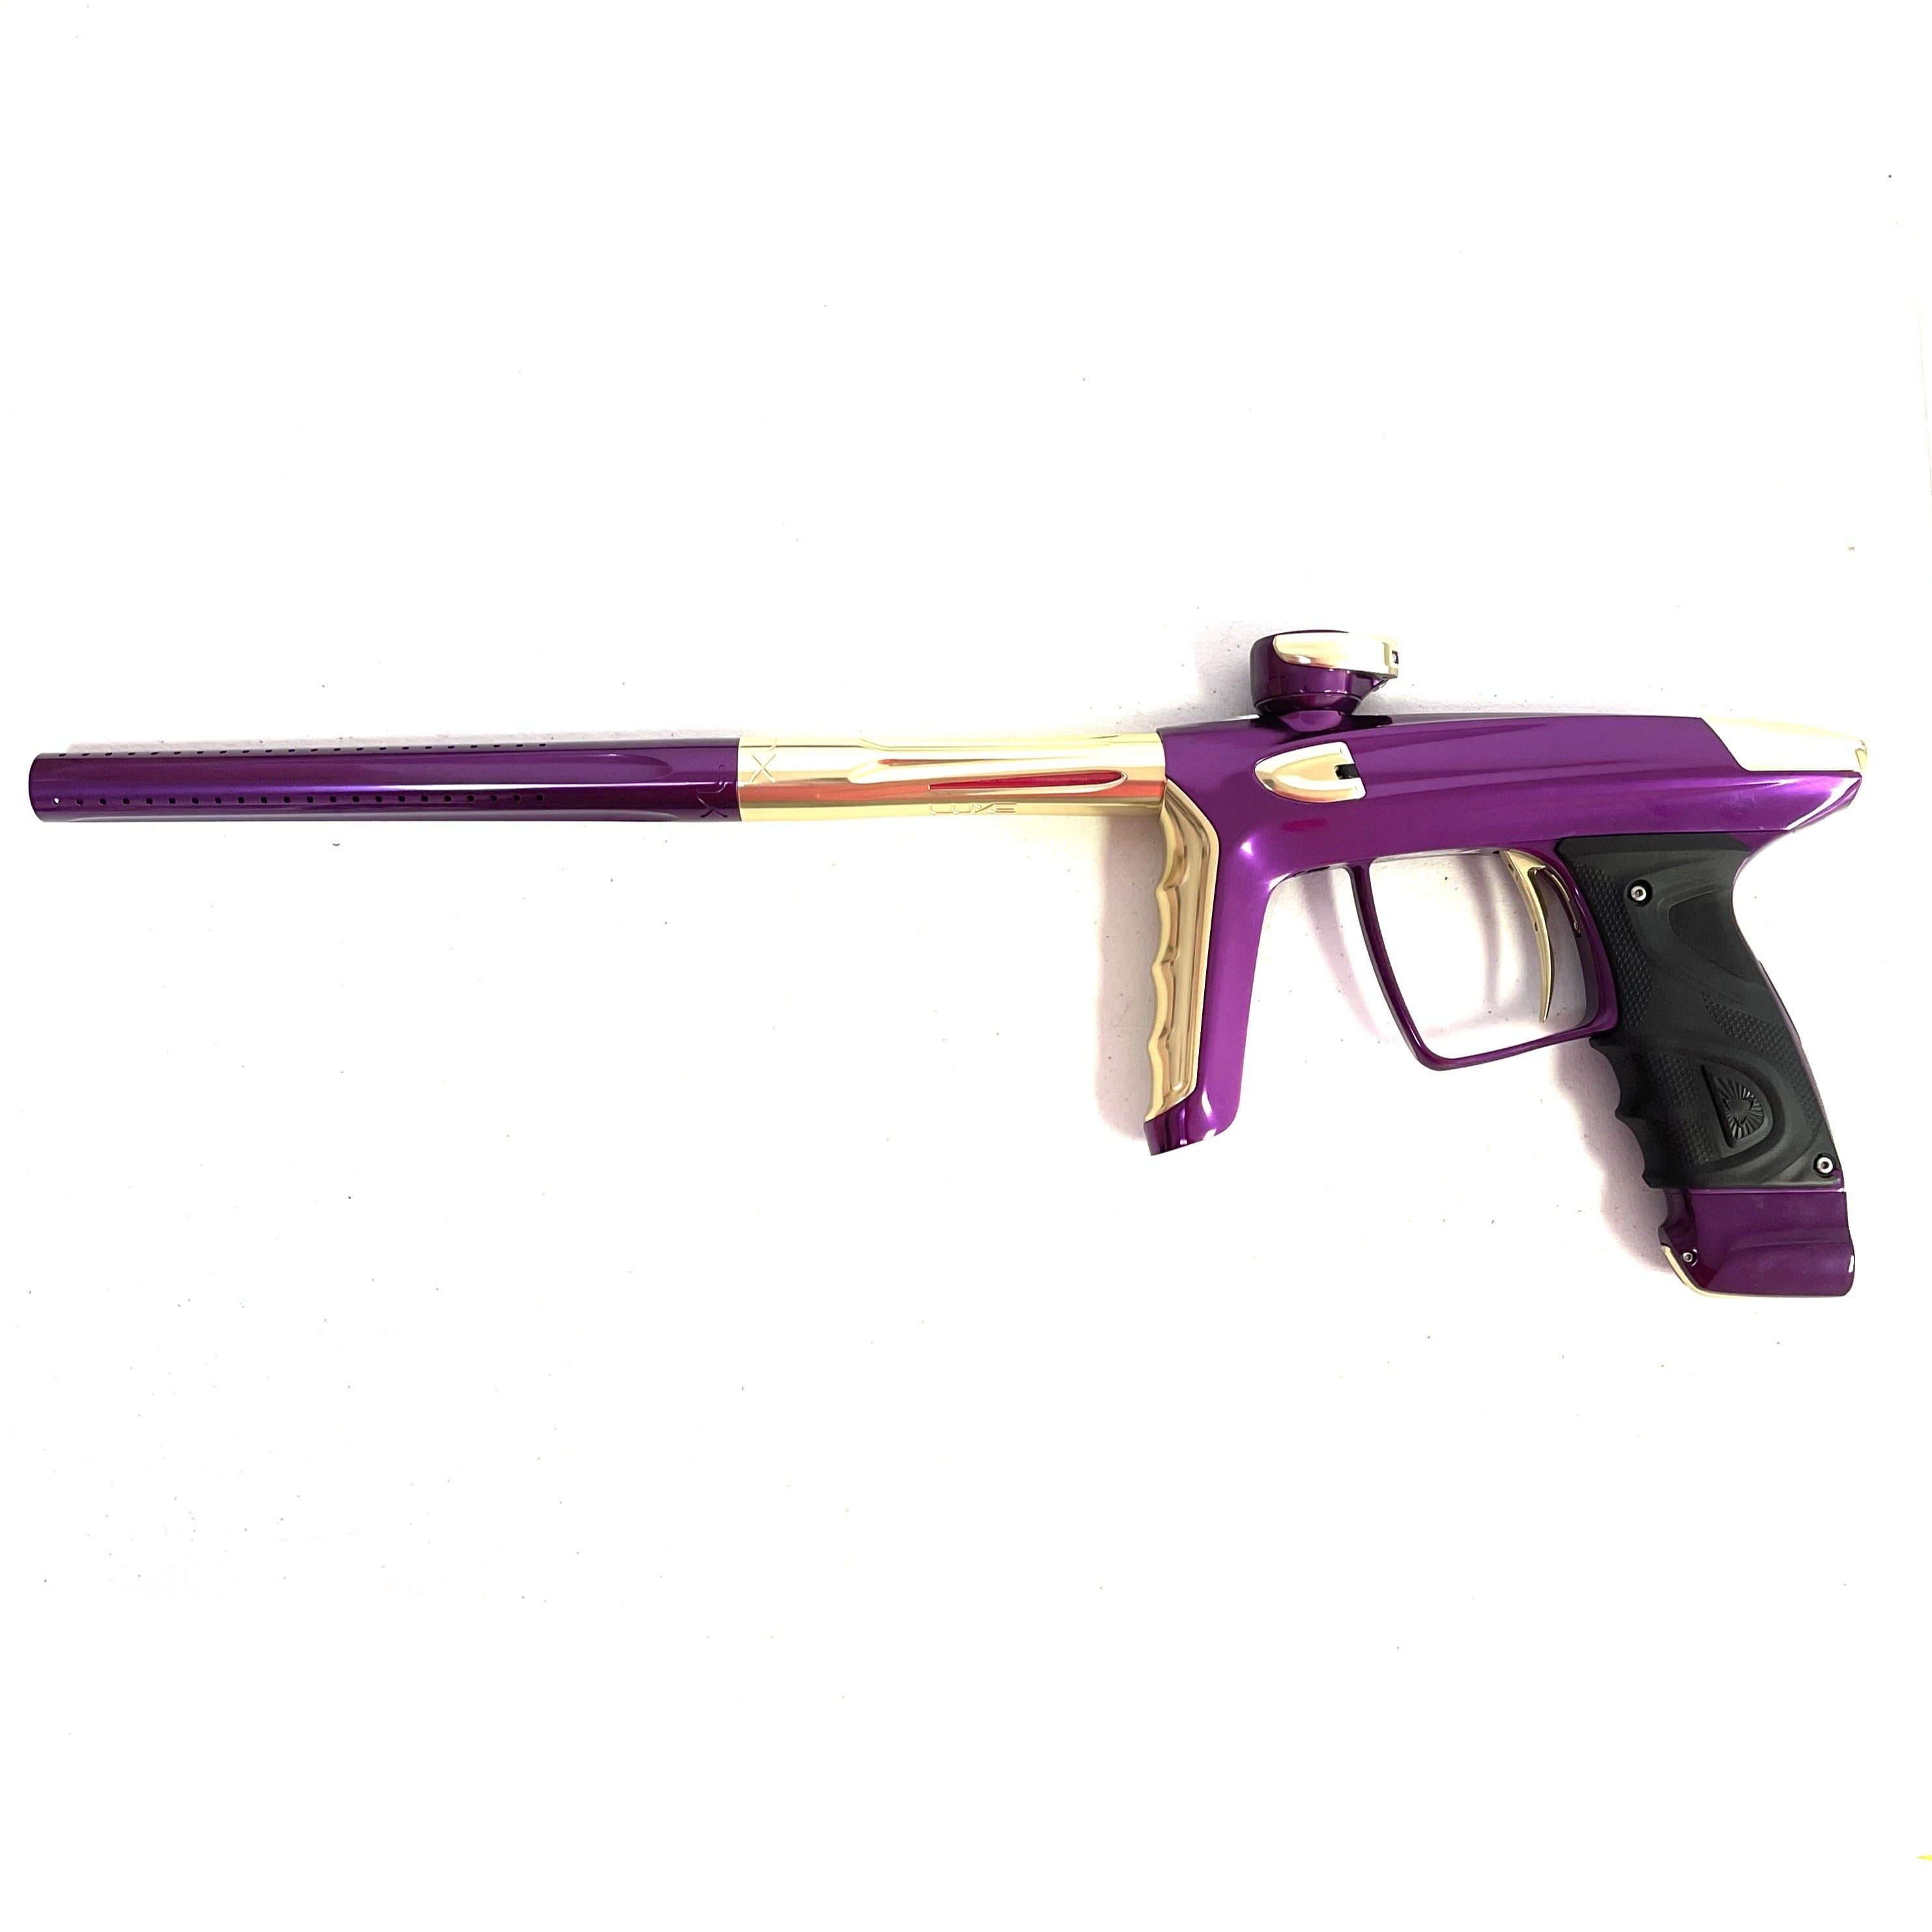 DLX Luxe TM40 Paintball Gun - Polished Purple/Polished Gold